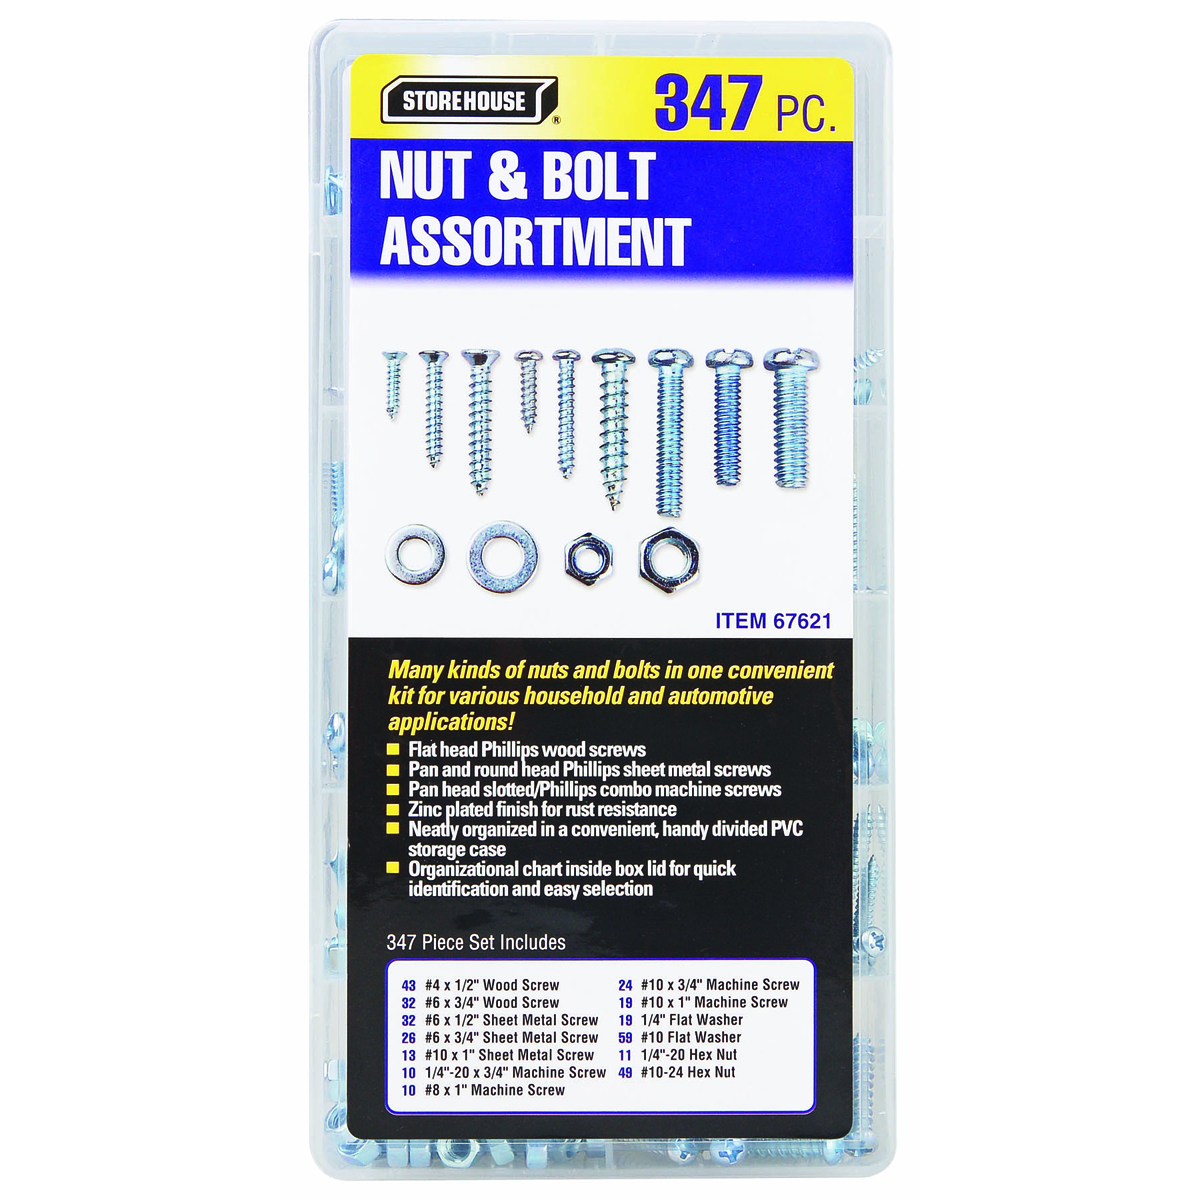 STOREHOUSE Nut and Bolt Assortment 347 Pc. - Item 67621